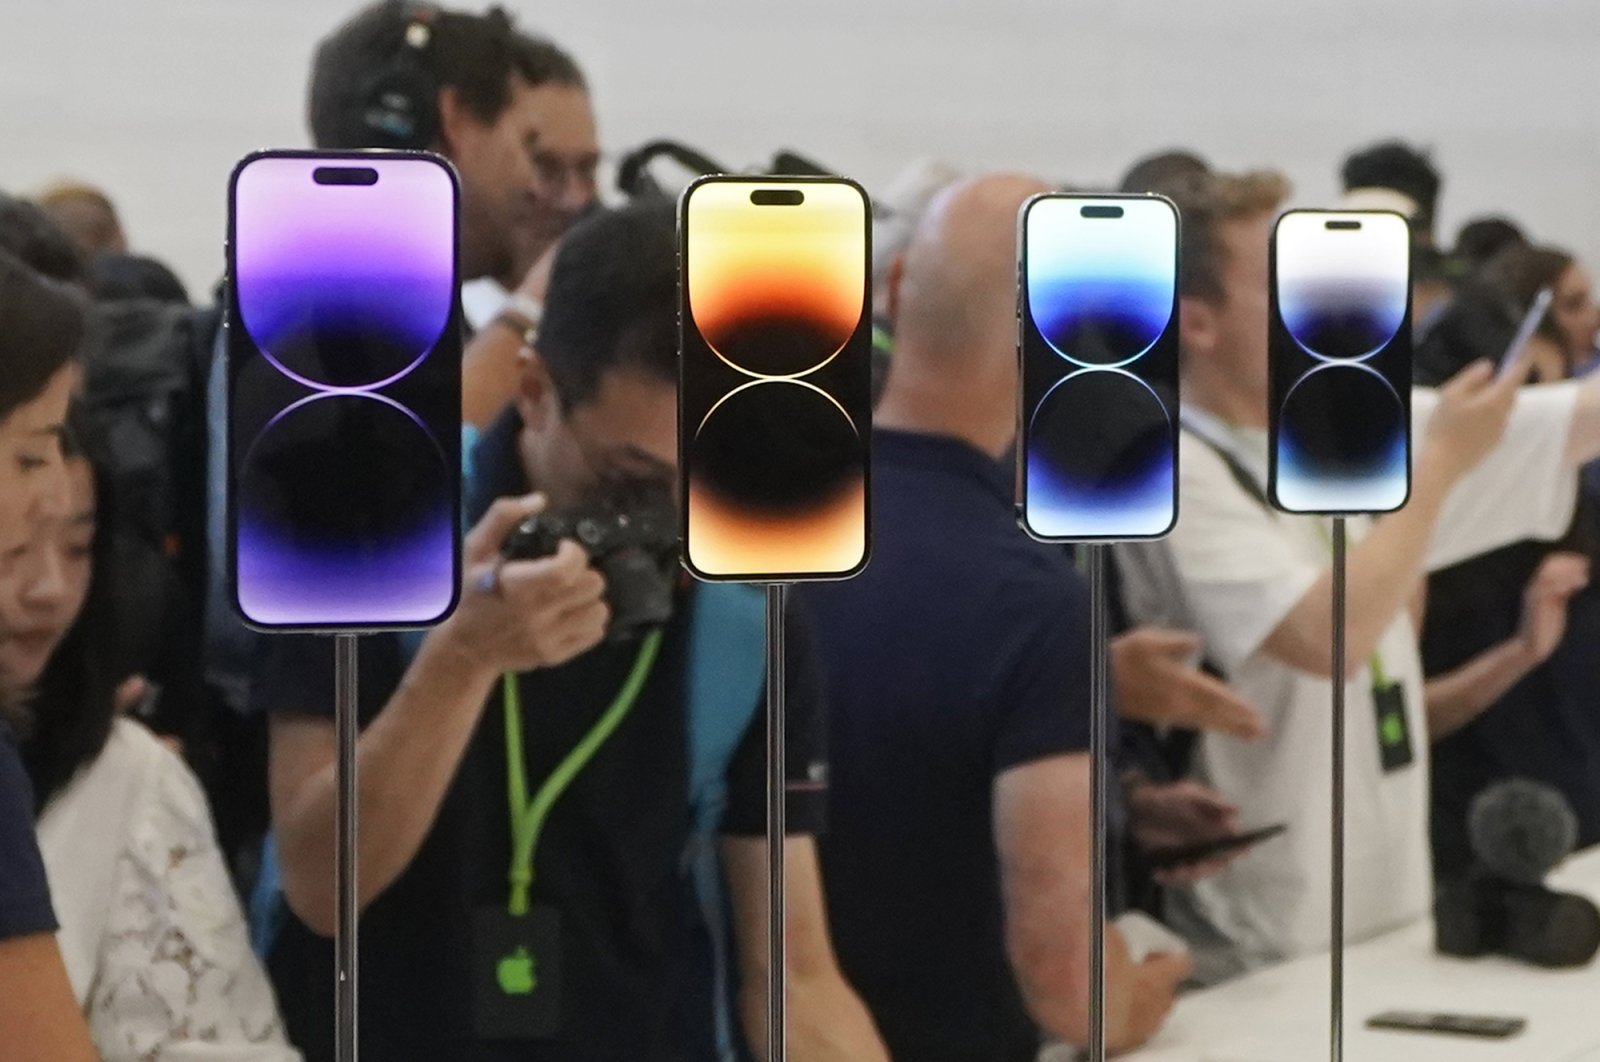 New iPhone 14 Pro models are on display at an Apple event on the campus of Apple&#039;s headquarters in Cupertino, California, U.S., Sept. 7, 2022. (AP Photo)